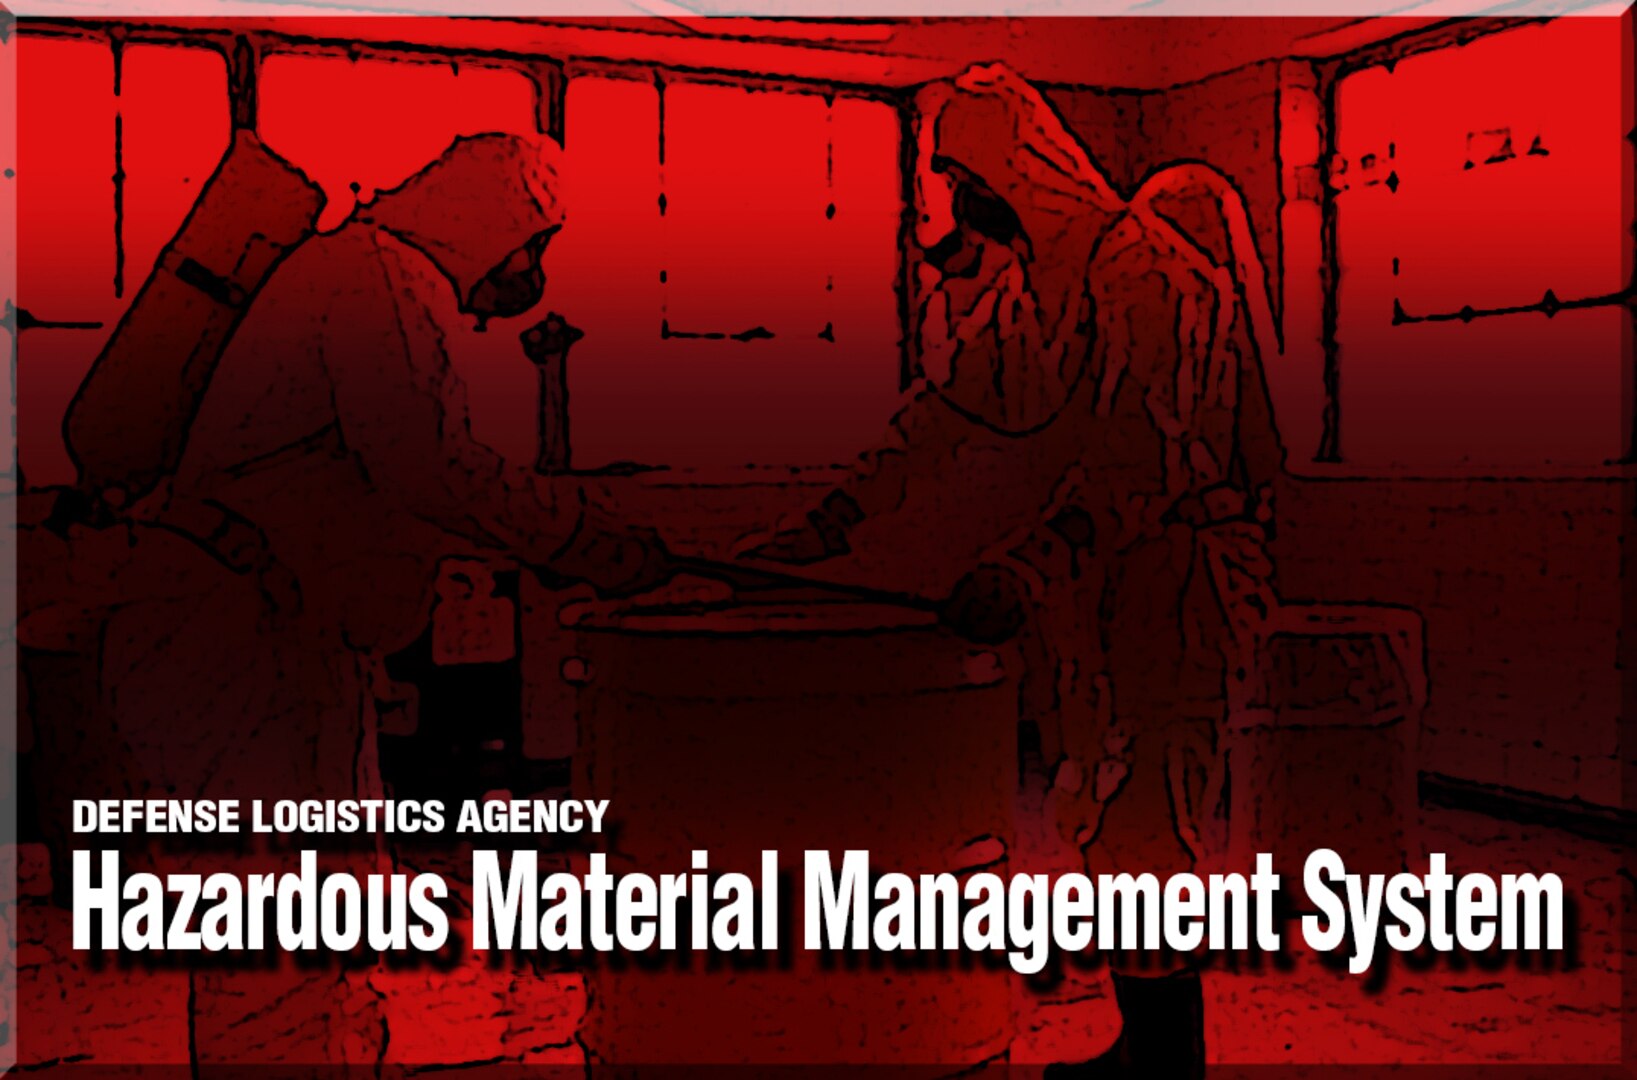 The Air Force’s system that provides cradle-to-grave tracking, management and reporting capabilities for hazardous materials and waste is now under the management of Defense Logistics Agency Information Operations and DLA Logistics Operations. 